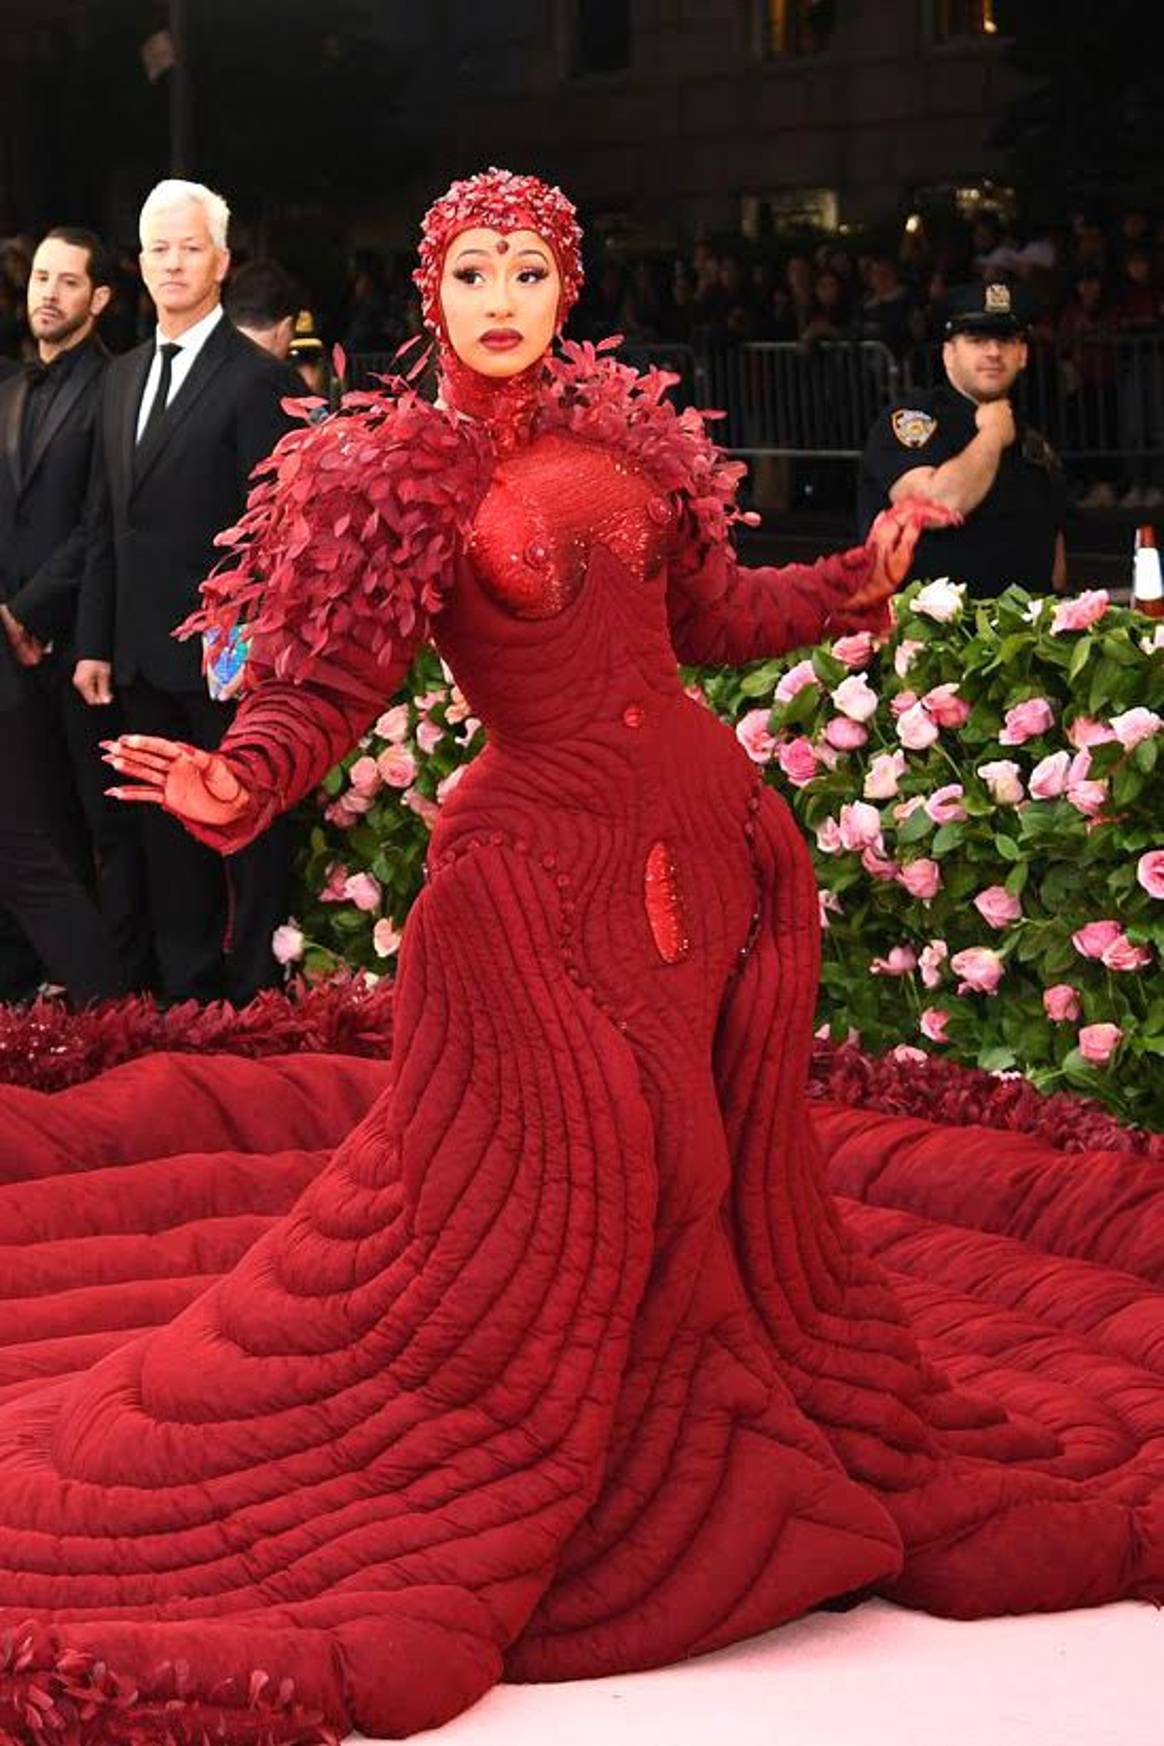 Cardi B at the Met Gala wearing a gown quilted by New York Embroidery Studio